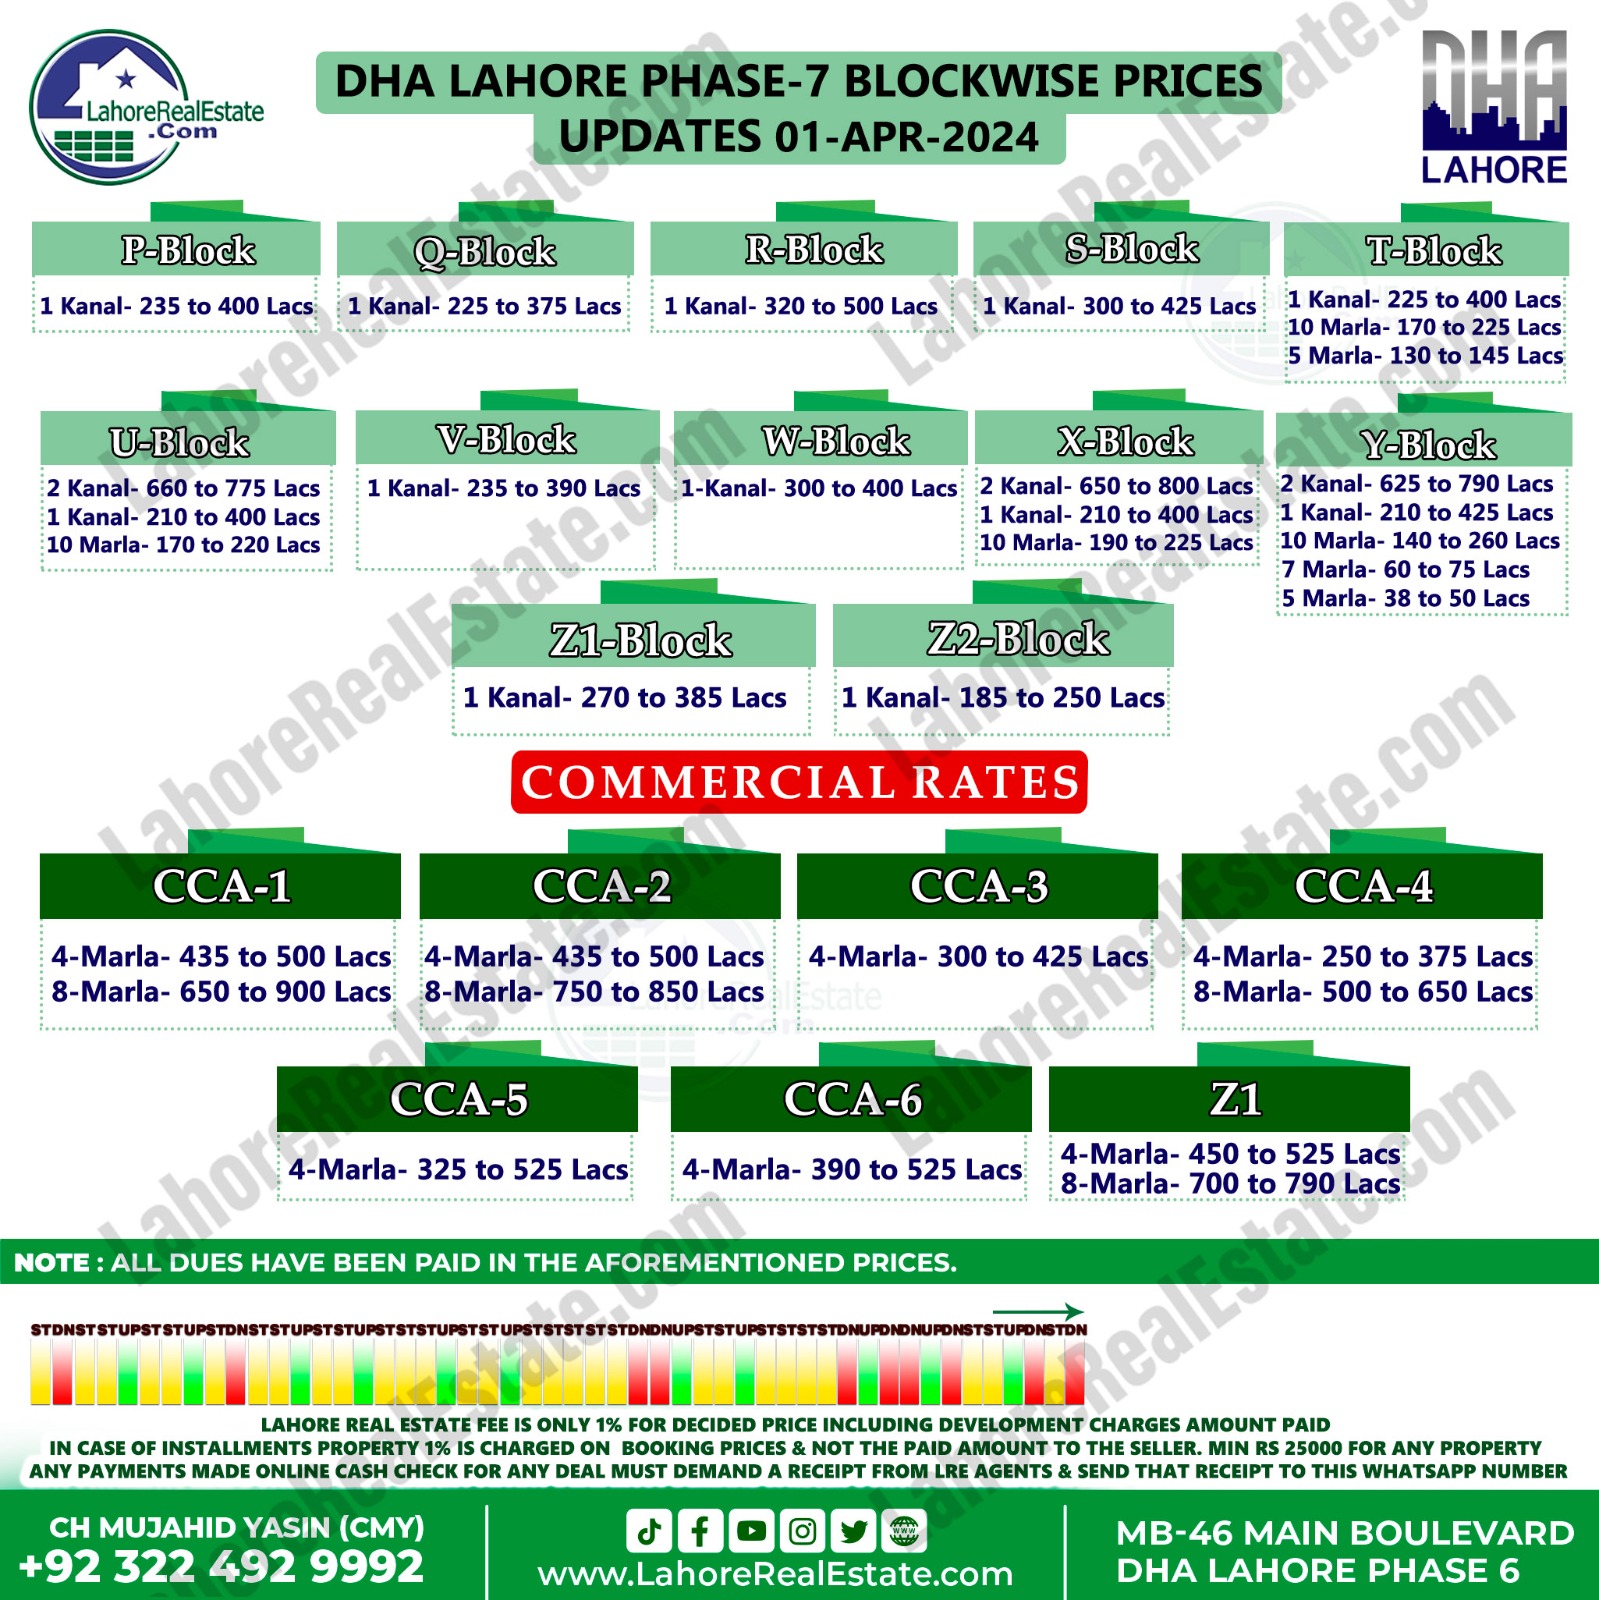 DHA Lahore Phase 7 Plot Prices & Blockwise Rates Update April 01, 2024